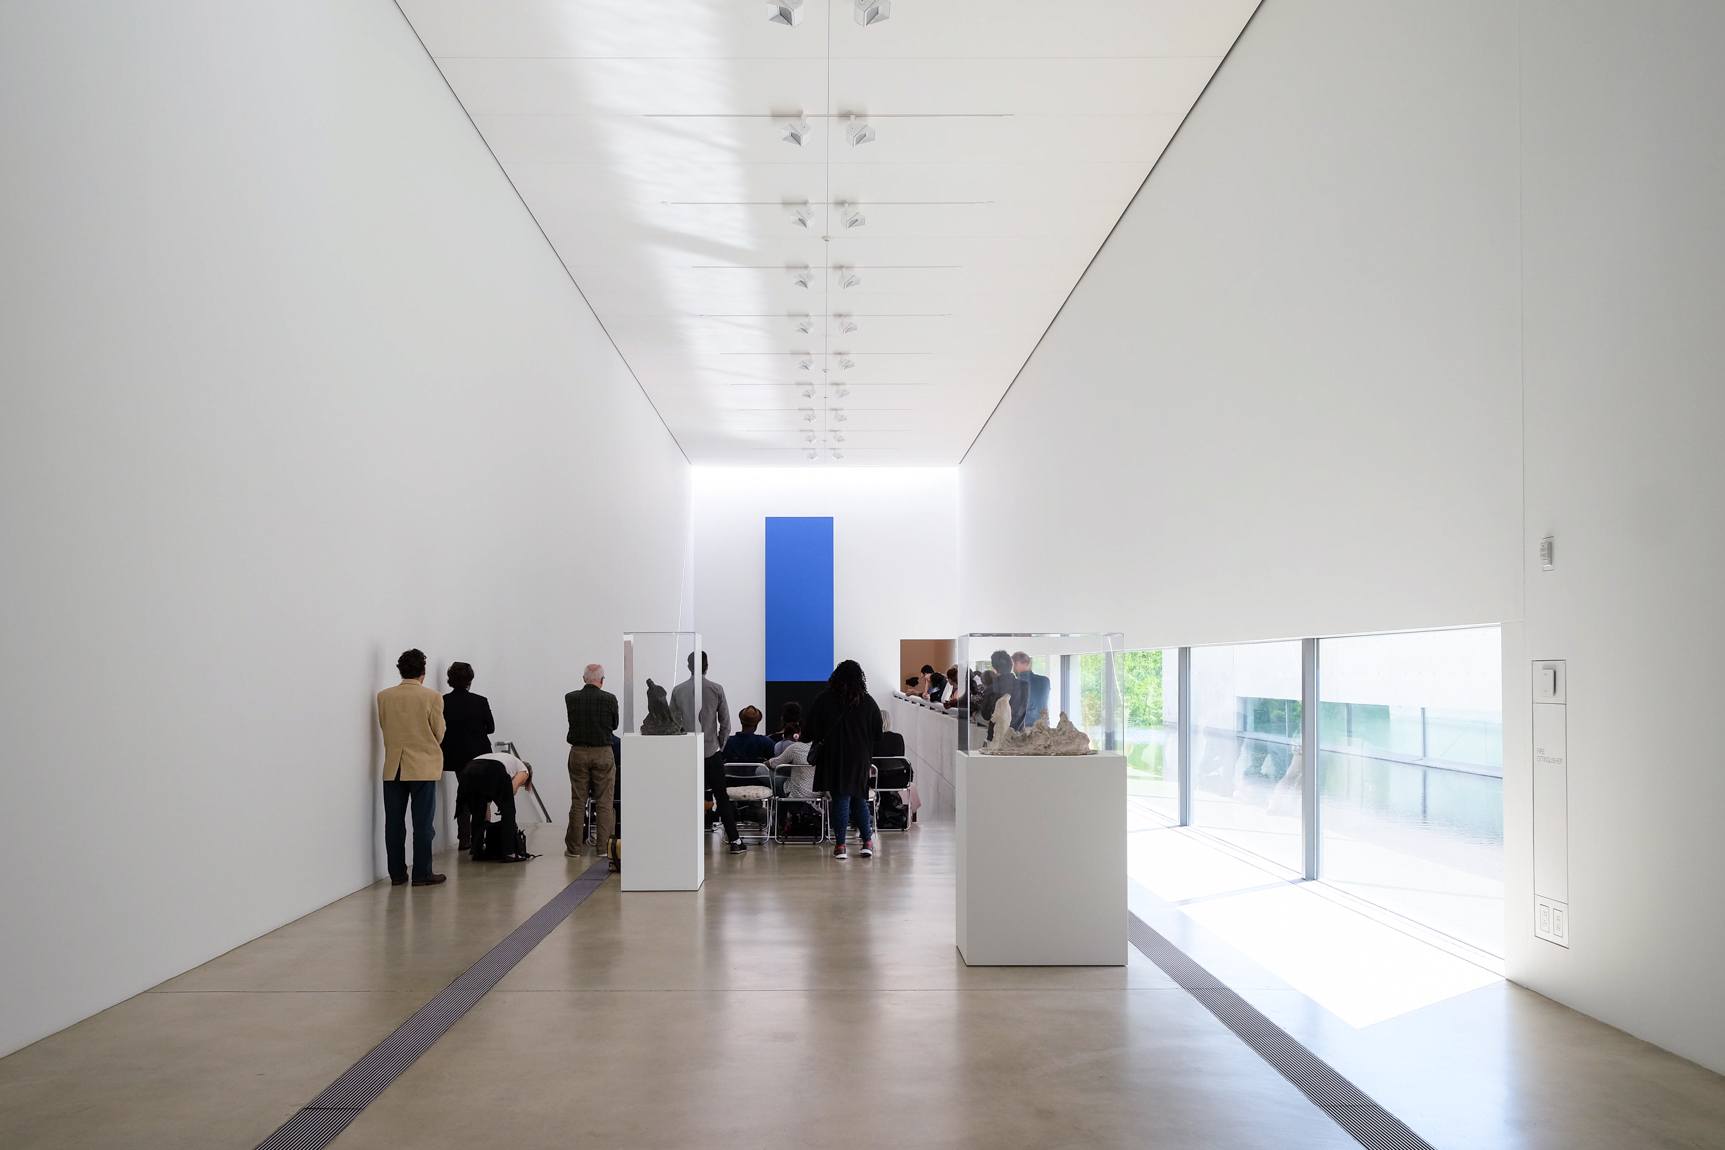 View of event-goers in the Main Gallery from behind, who are facing "Blue Black" by Ellsworth Kelly.